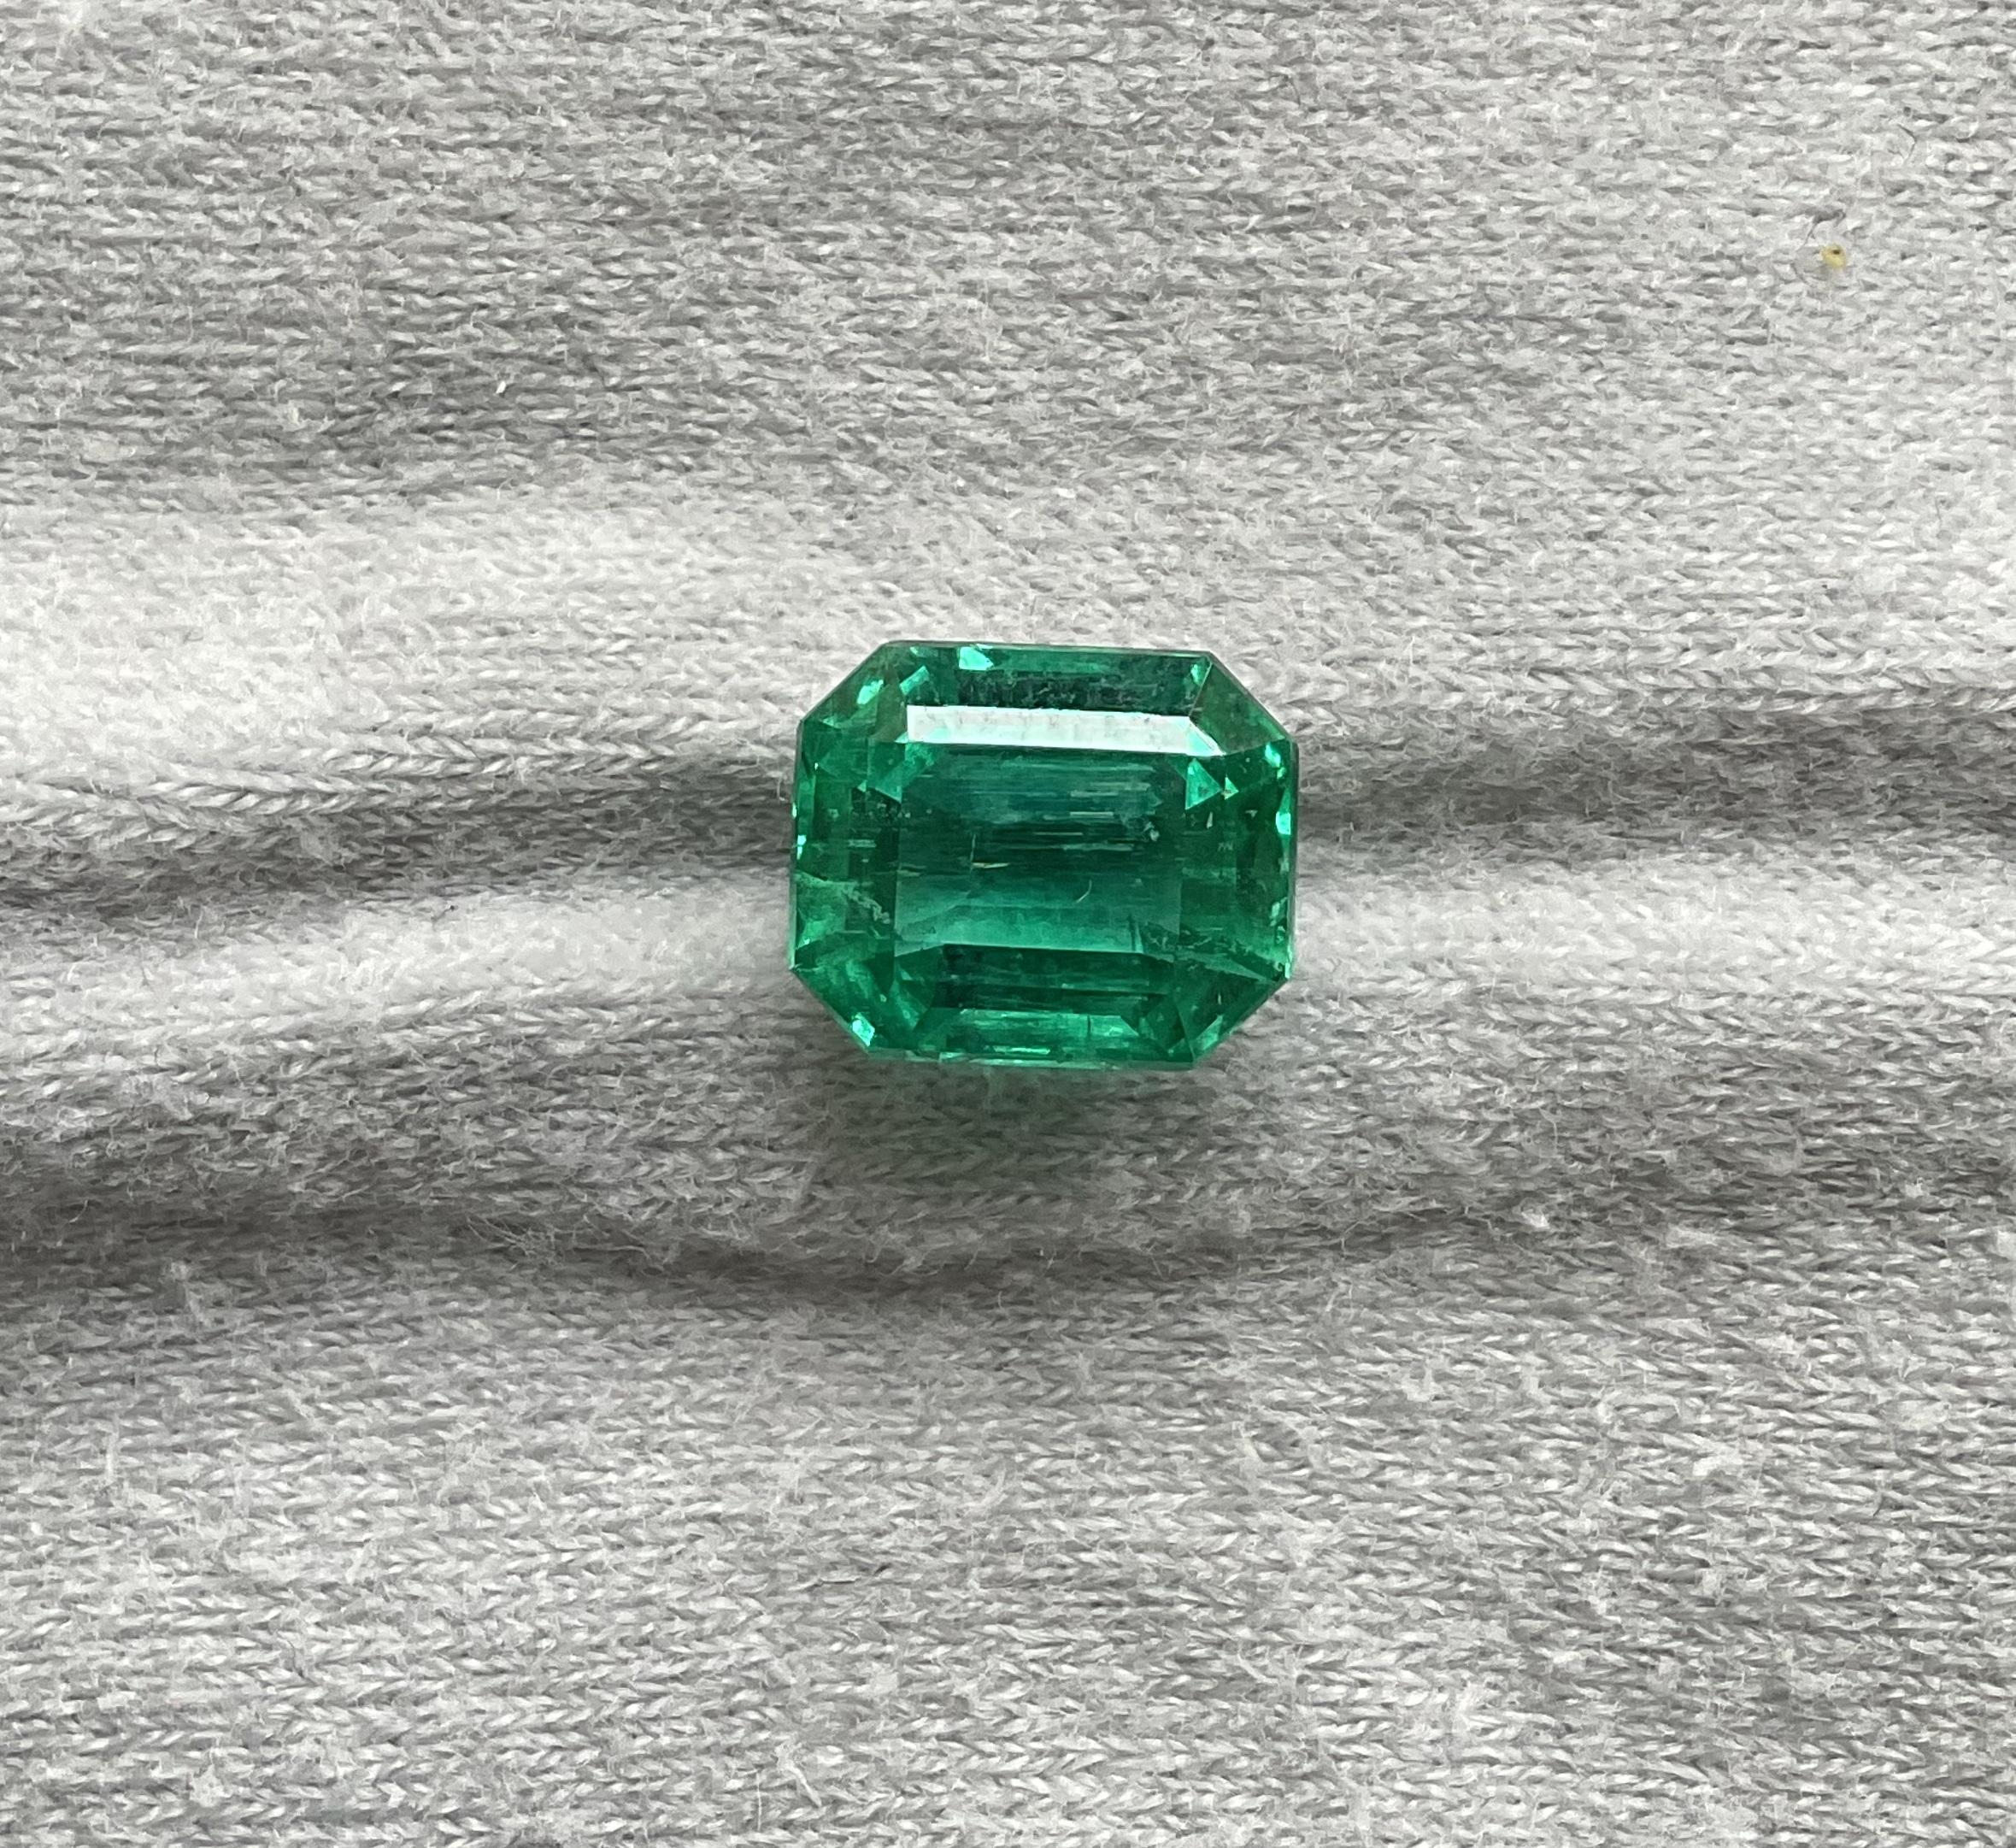 4.30 Carats Zambia Emerald Octagon Cut Stone For Fine jewelry Ring Natural Gem

Gemstone : Emerald
Weight: 4.30 carats
Size: 10x8.5x6
Pieces: 1
Shape: Octagon